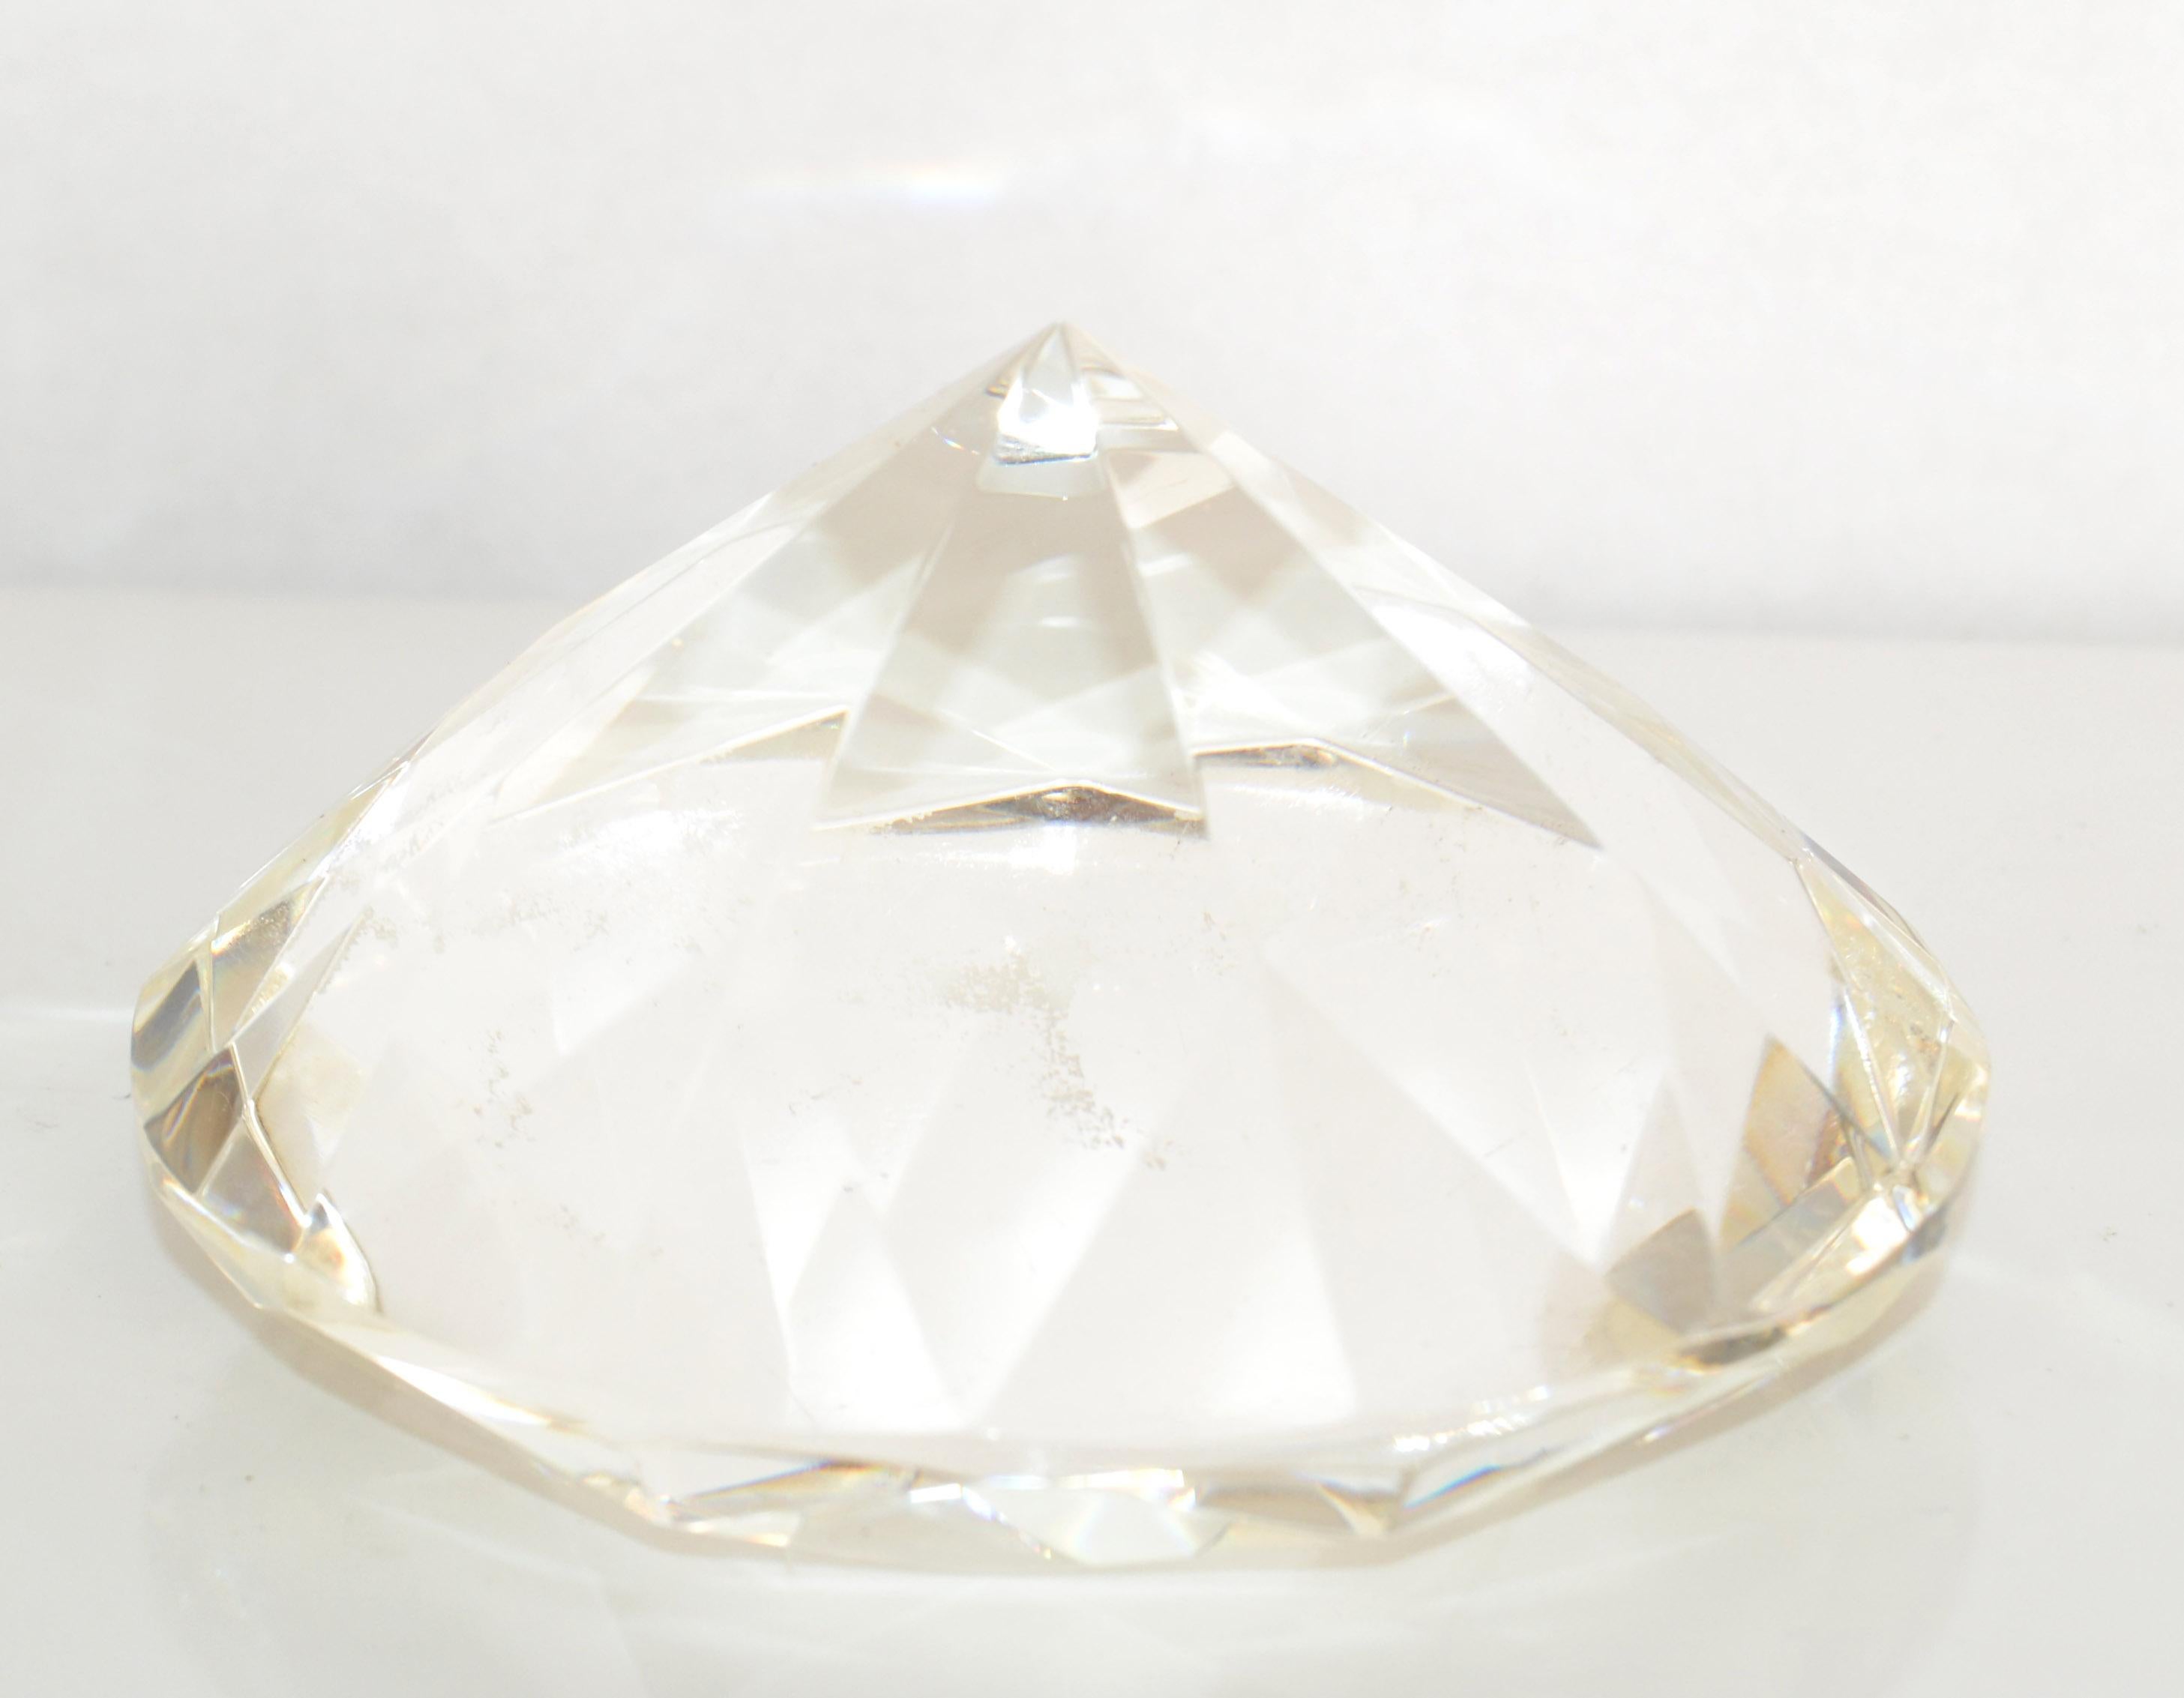 One Mid-Century Modern Faceted Glass Diamond Shaped Figurine Paperweight Desk  For Sale 1